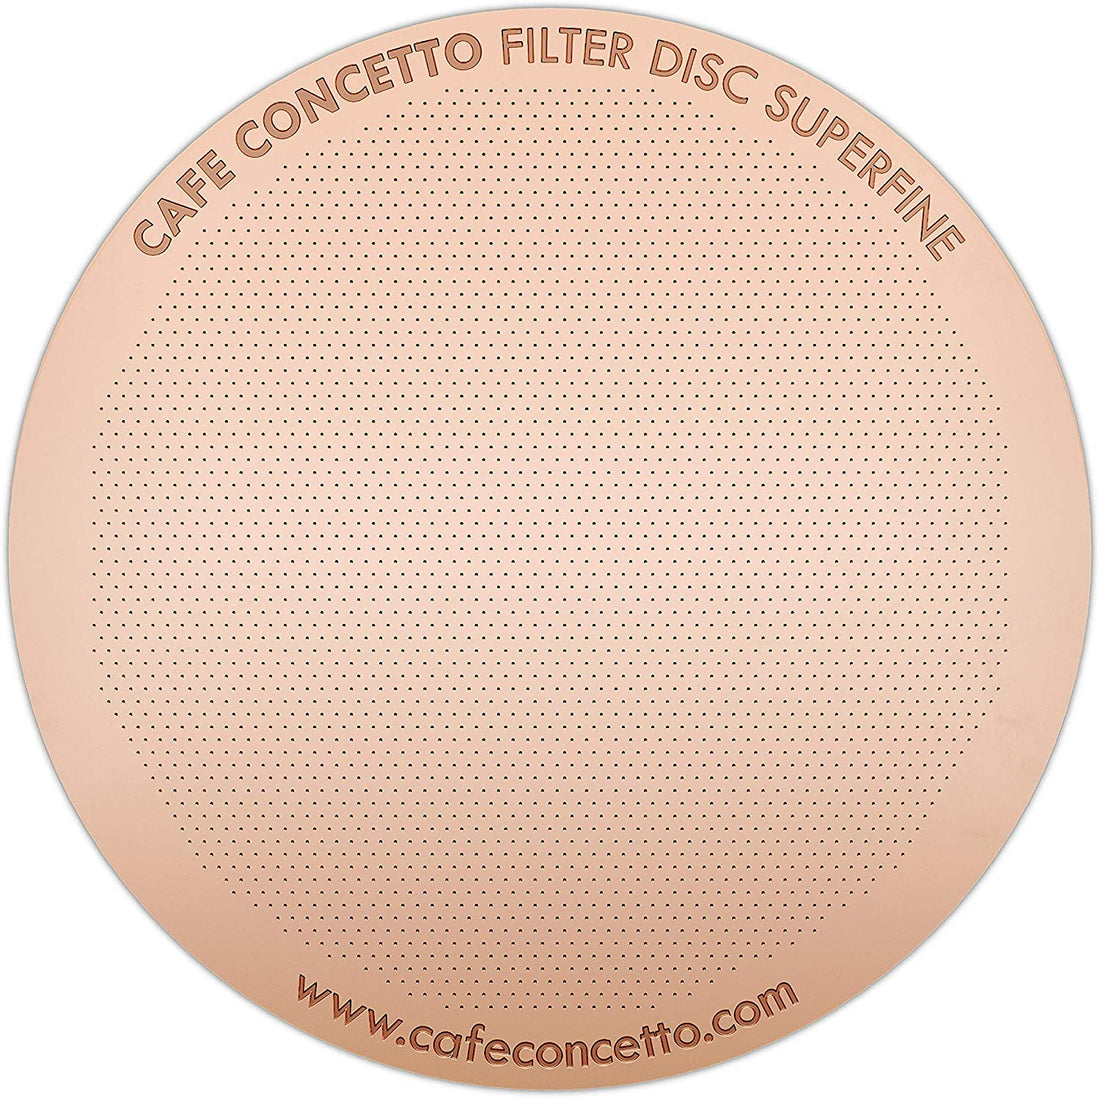 cafeconcetto metal filter superfine